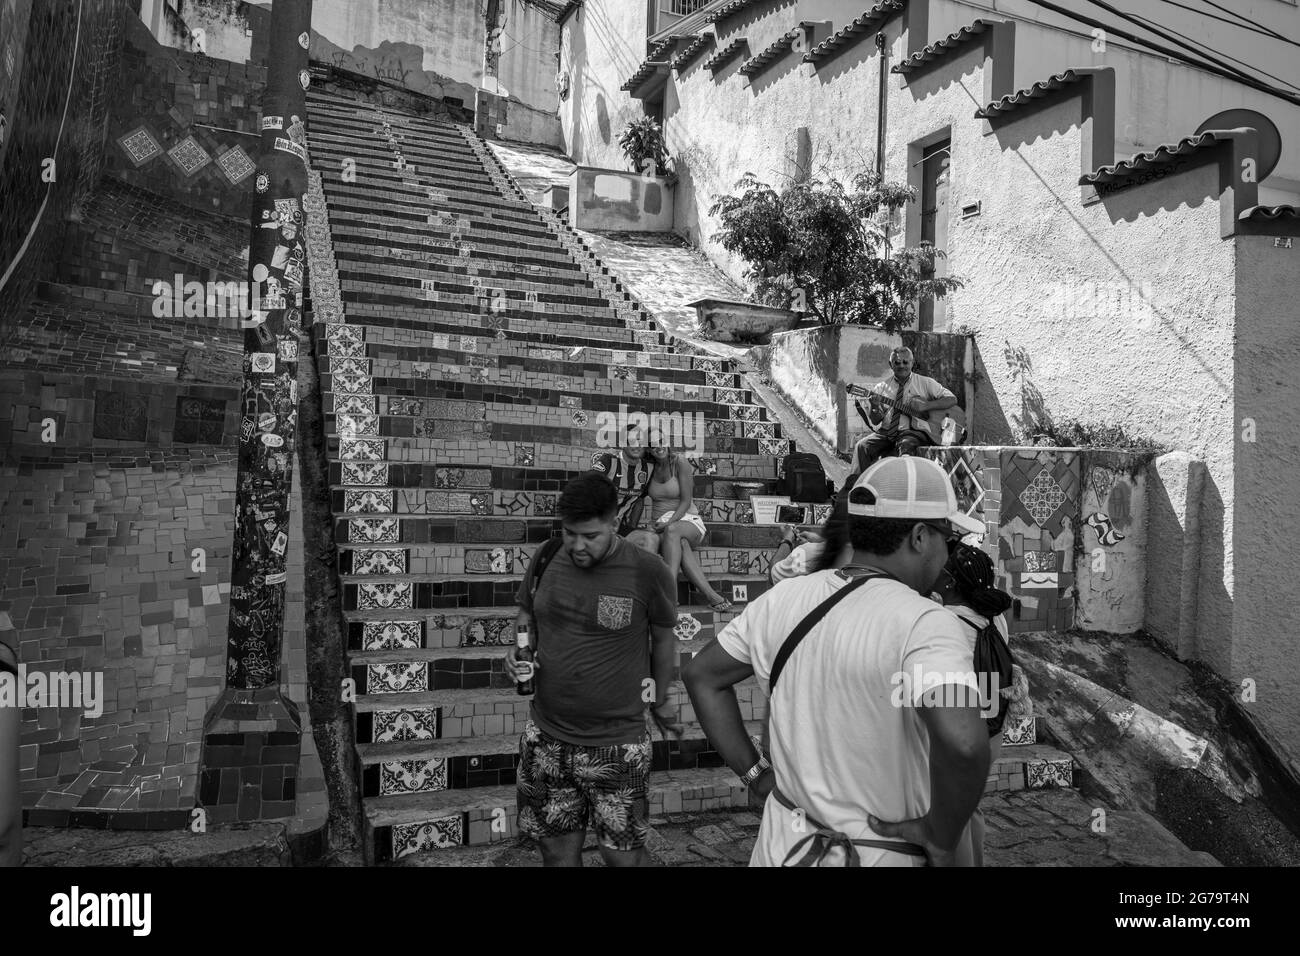 The Selaron steps (or Lapa Steps) which are covered by colorful tiles from all over the world, is one of the main tourist attractions in Rio de Janeiro. Stock Photo